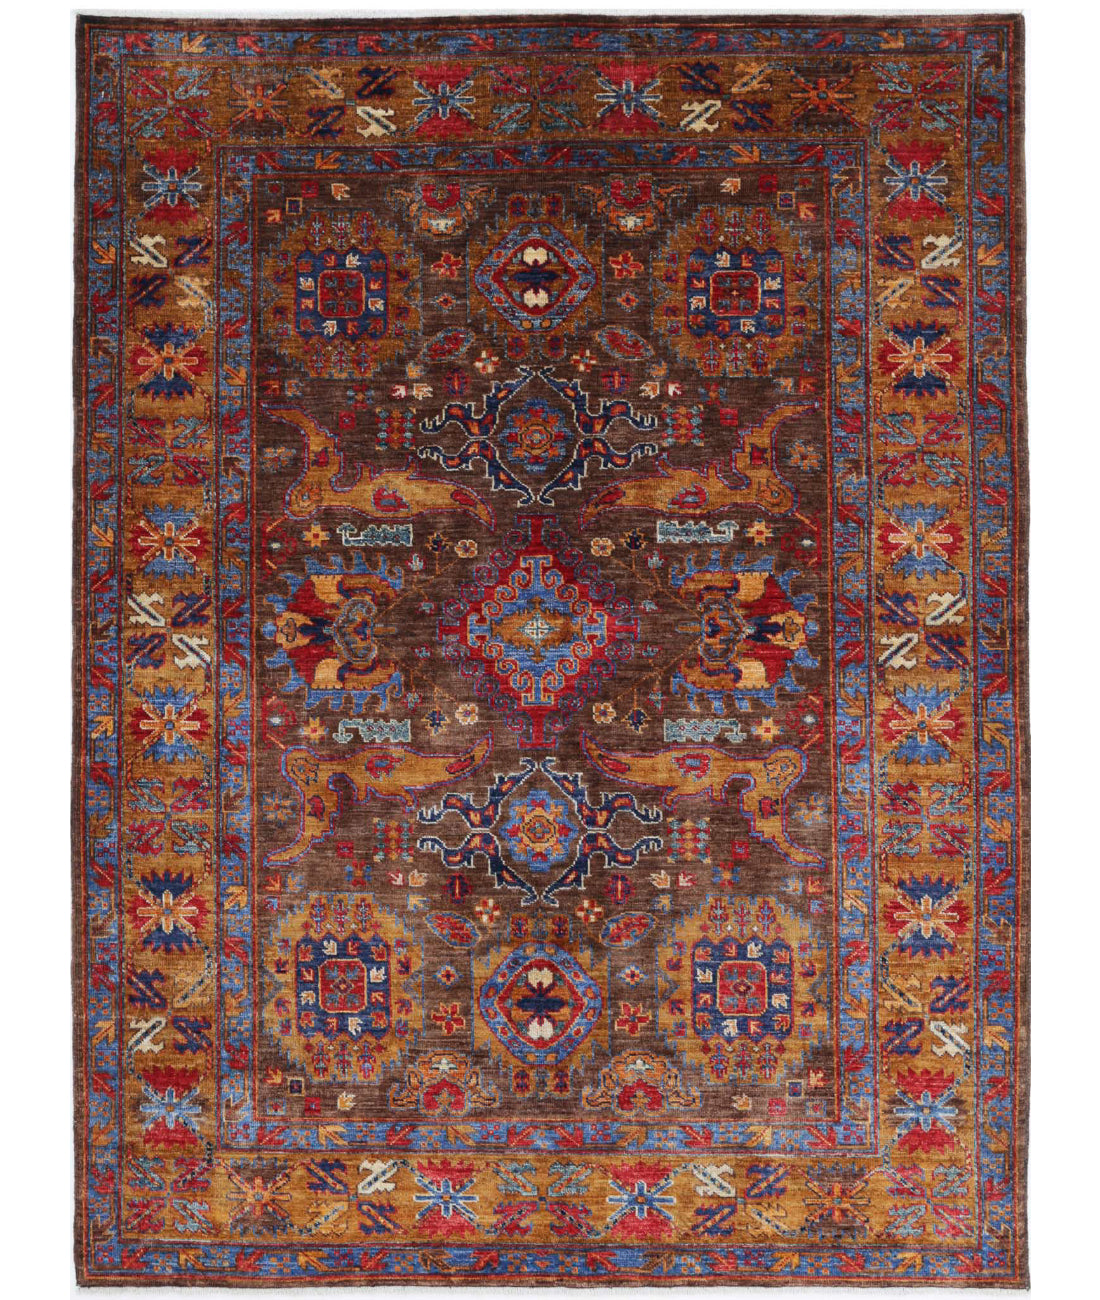 Hand Knotted Nomadic Caucasian Humna Wool Rug - 4'11'' x 6'9'' 4'11'' x 6'9'' (148 X 203) / Brown / Taupe